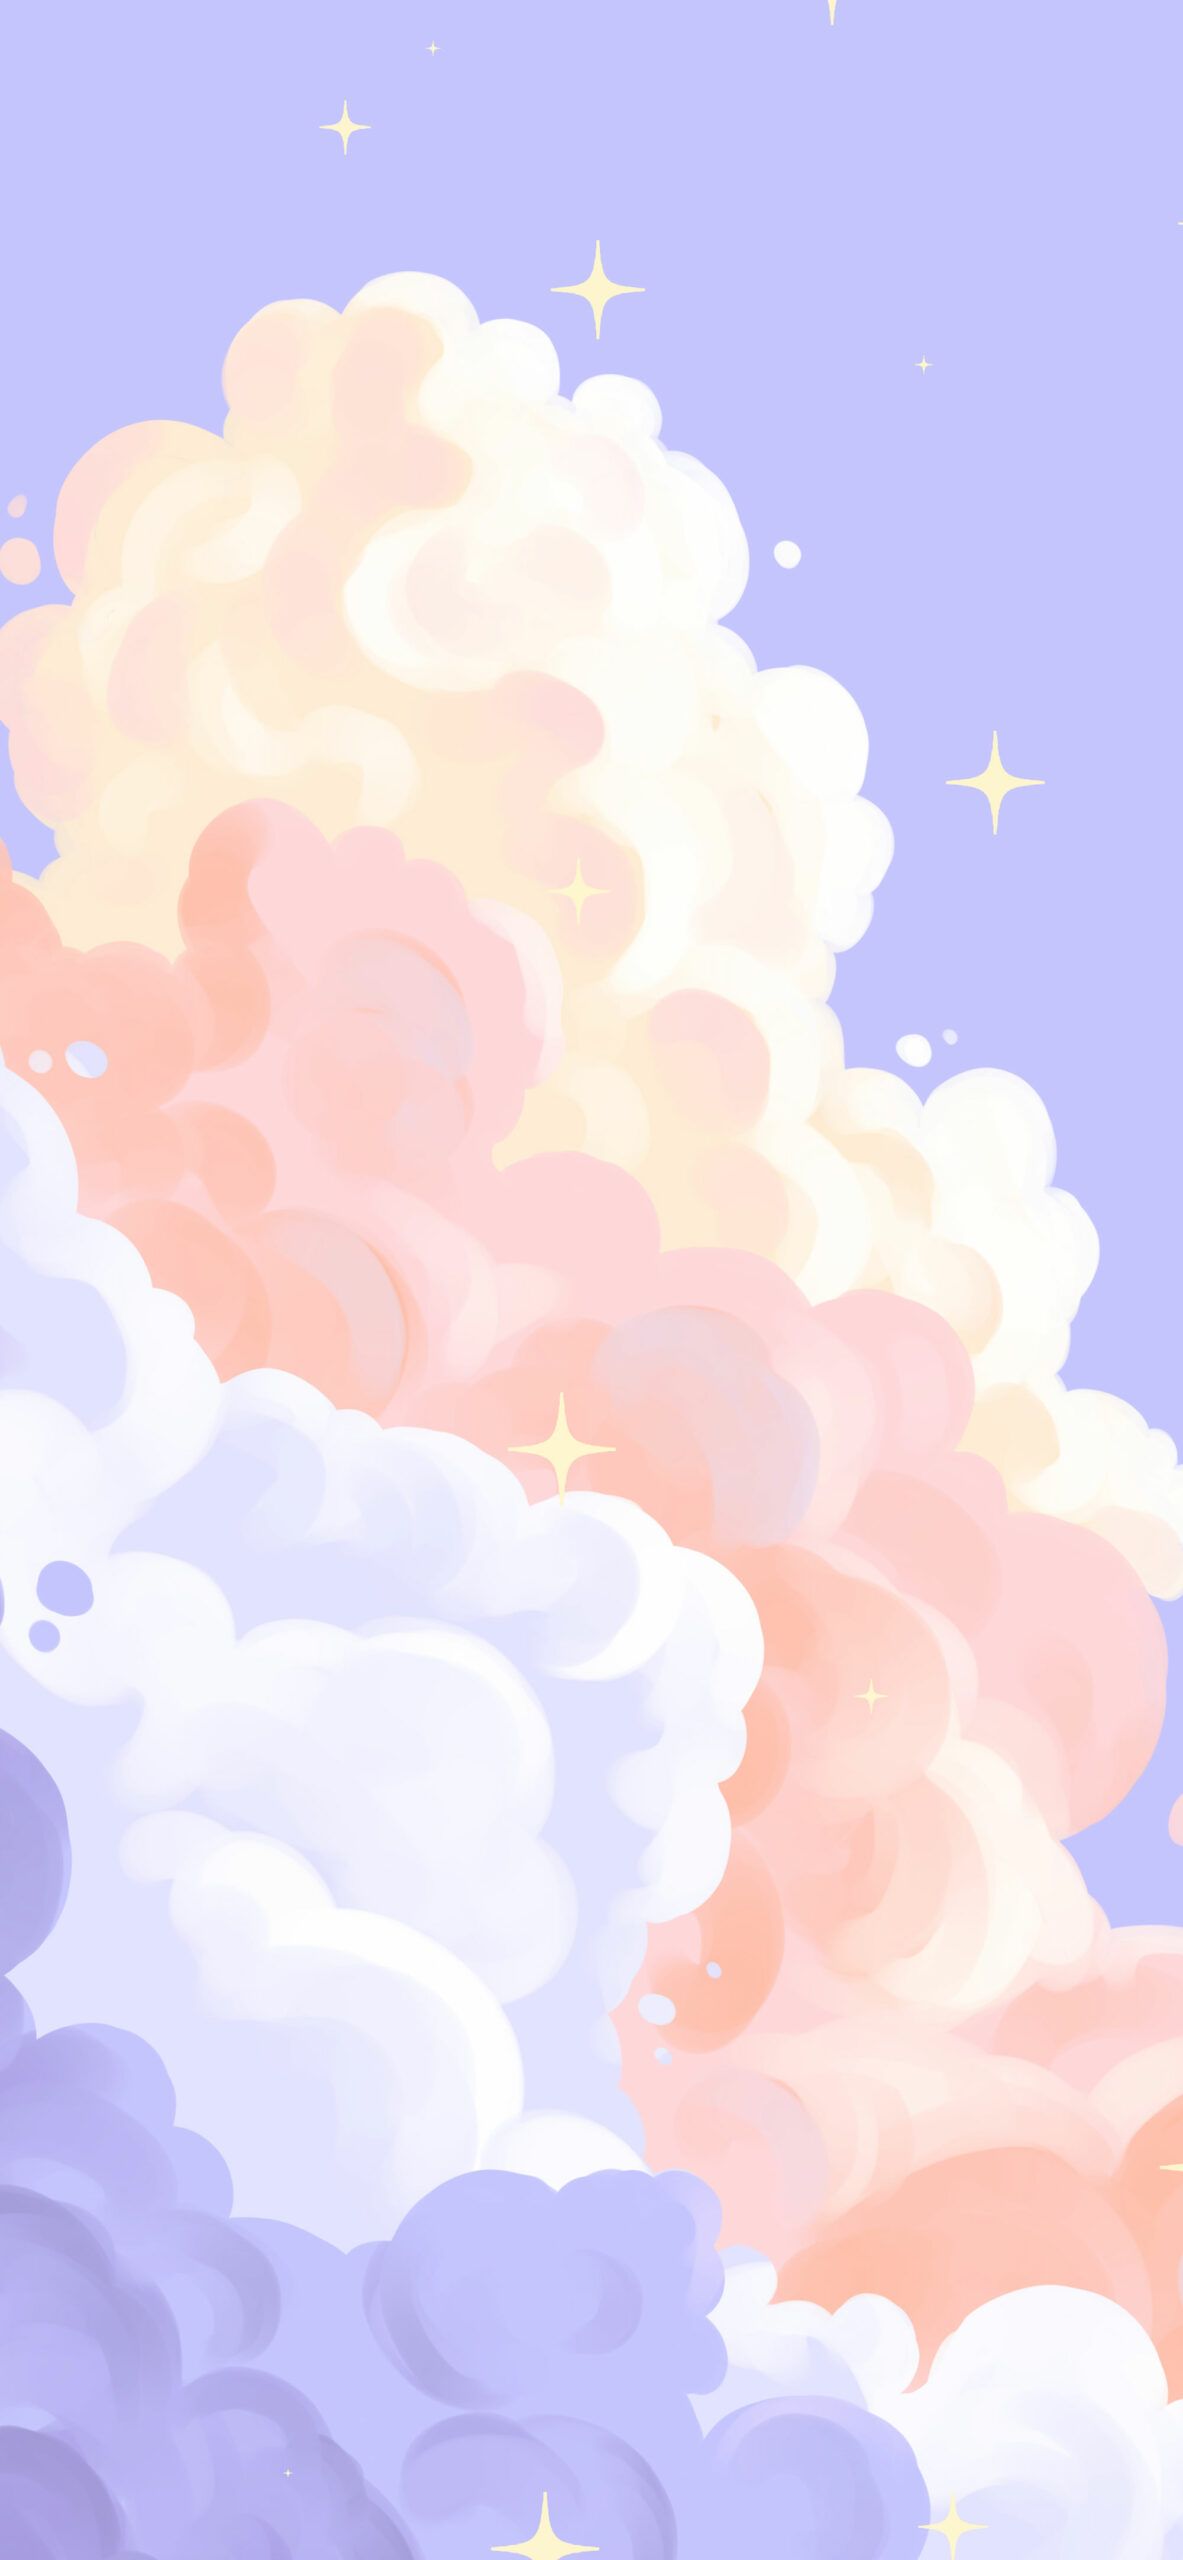 A cartoon of clouds and stars in the sky - Violet